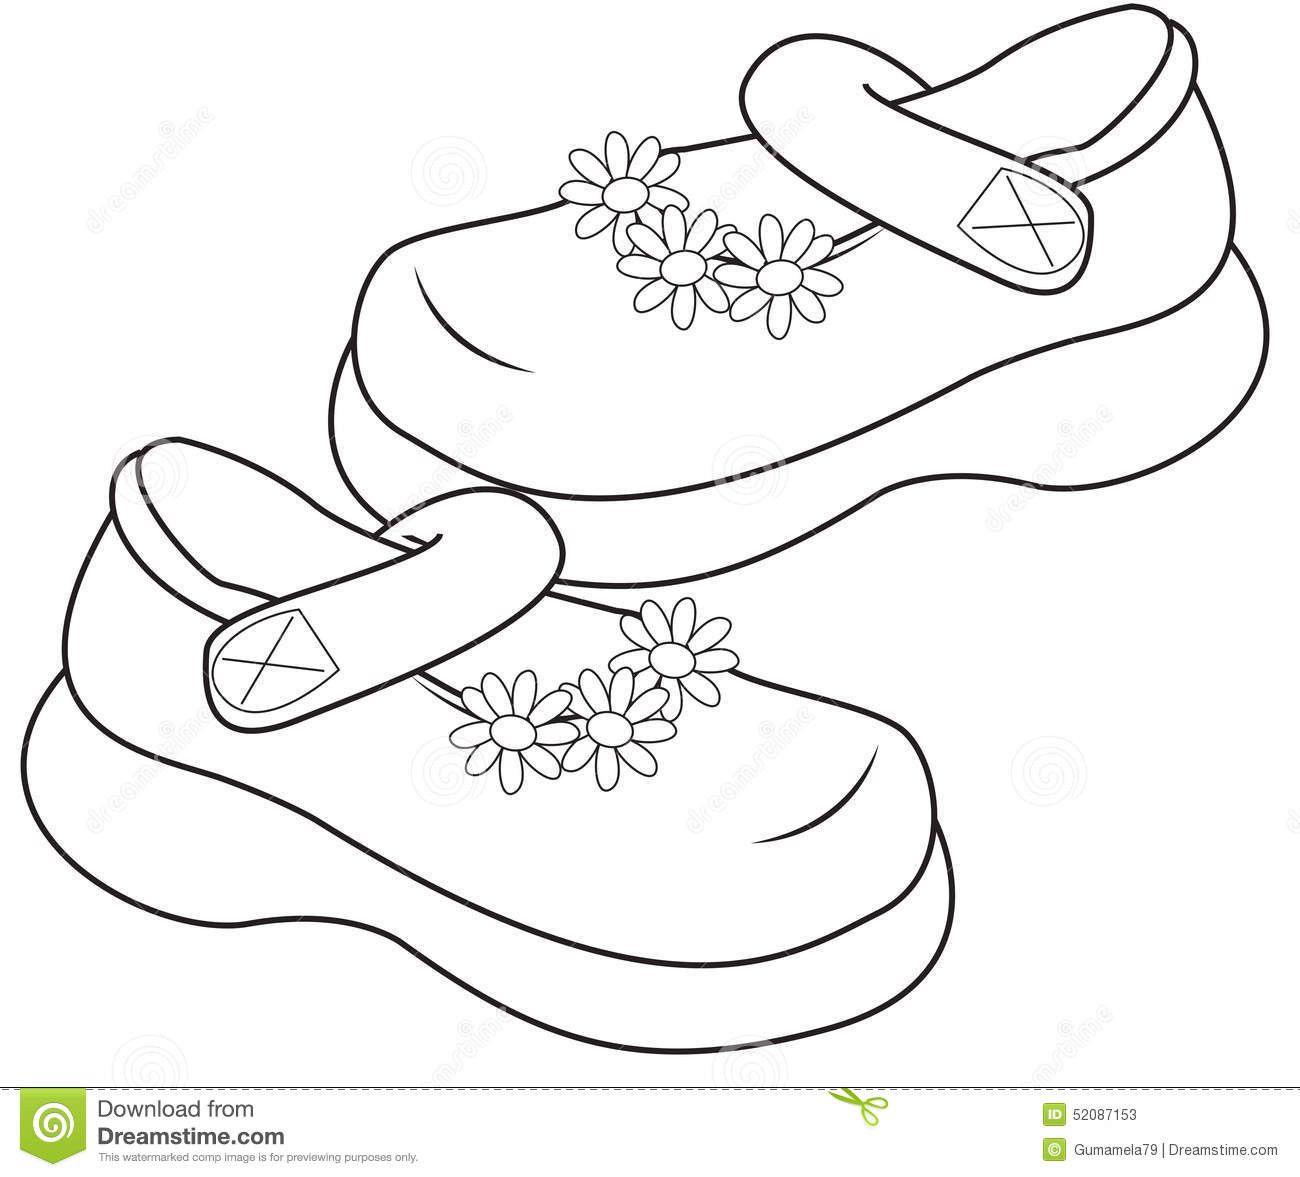 Girls Shoes Coloring Pages
 Shoes For Girls Coloring Page Stock Illustration Image